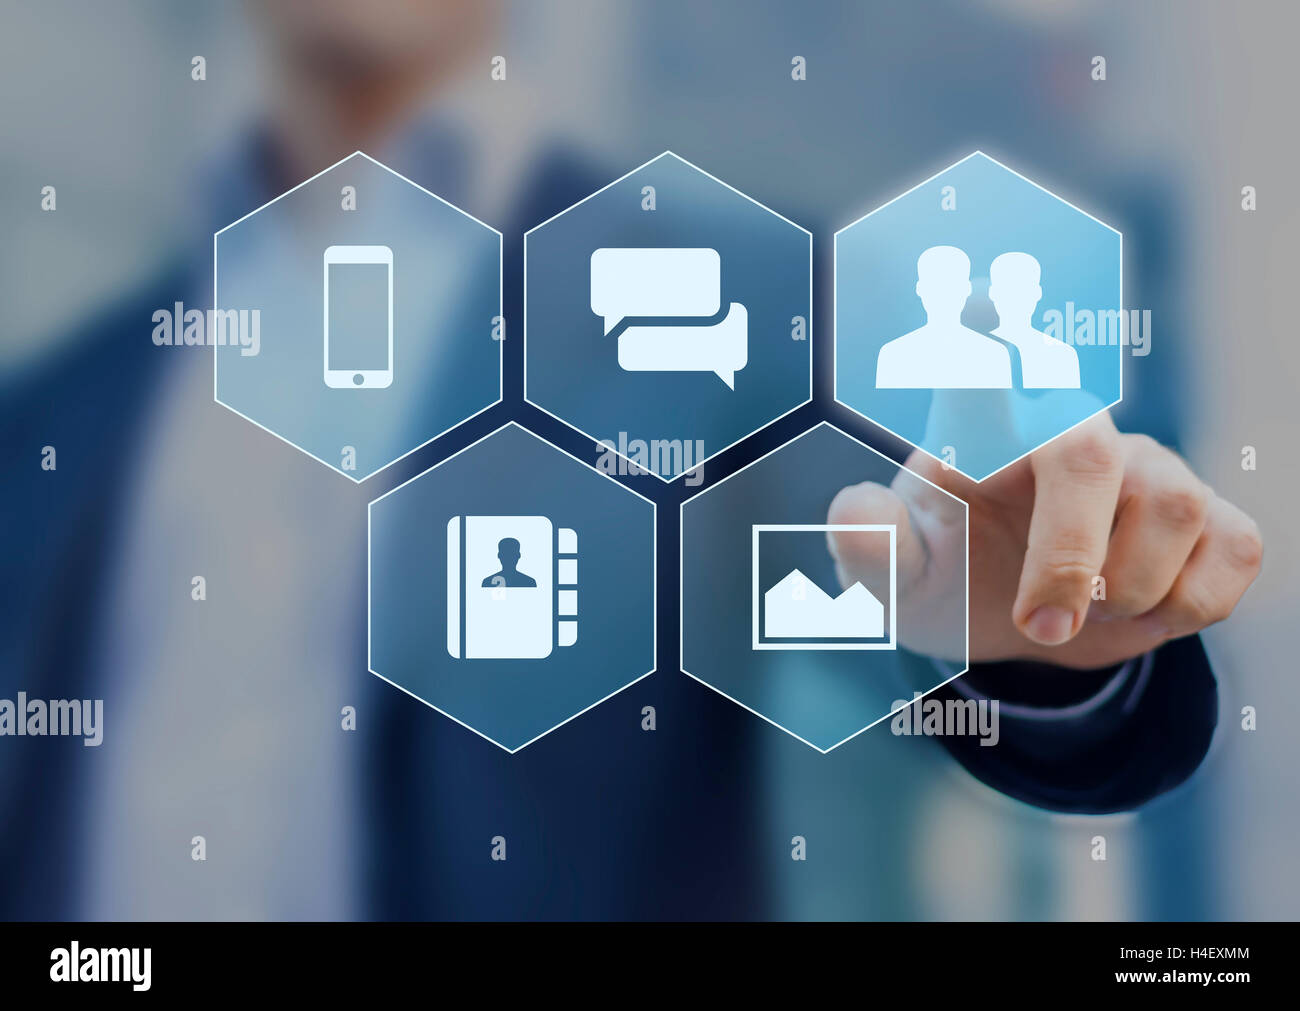 Social network icons on virtual screen buttons with a person in background Stock Photo